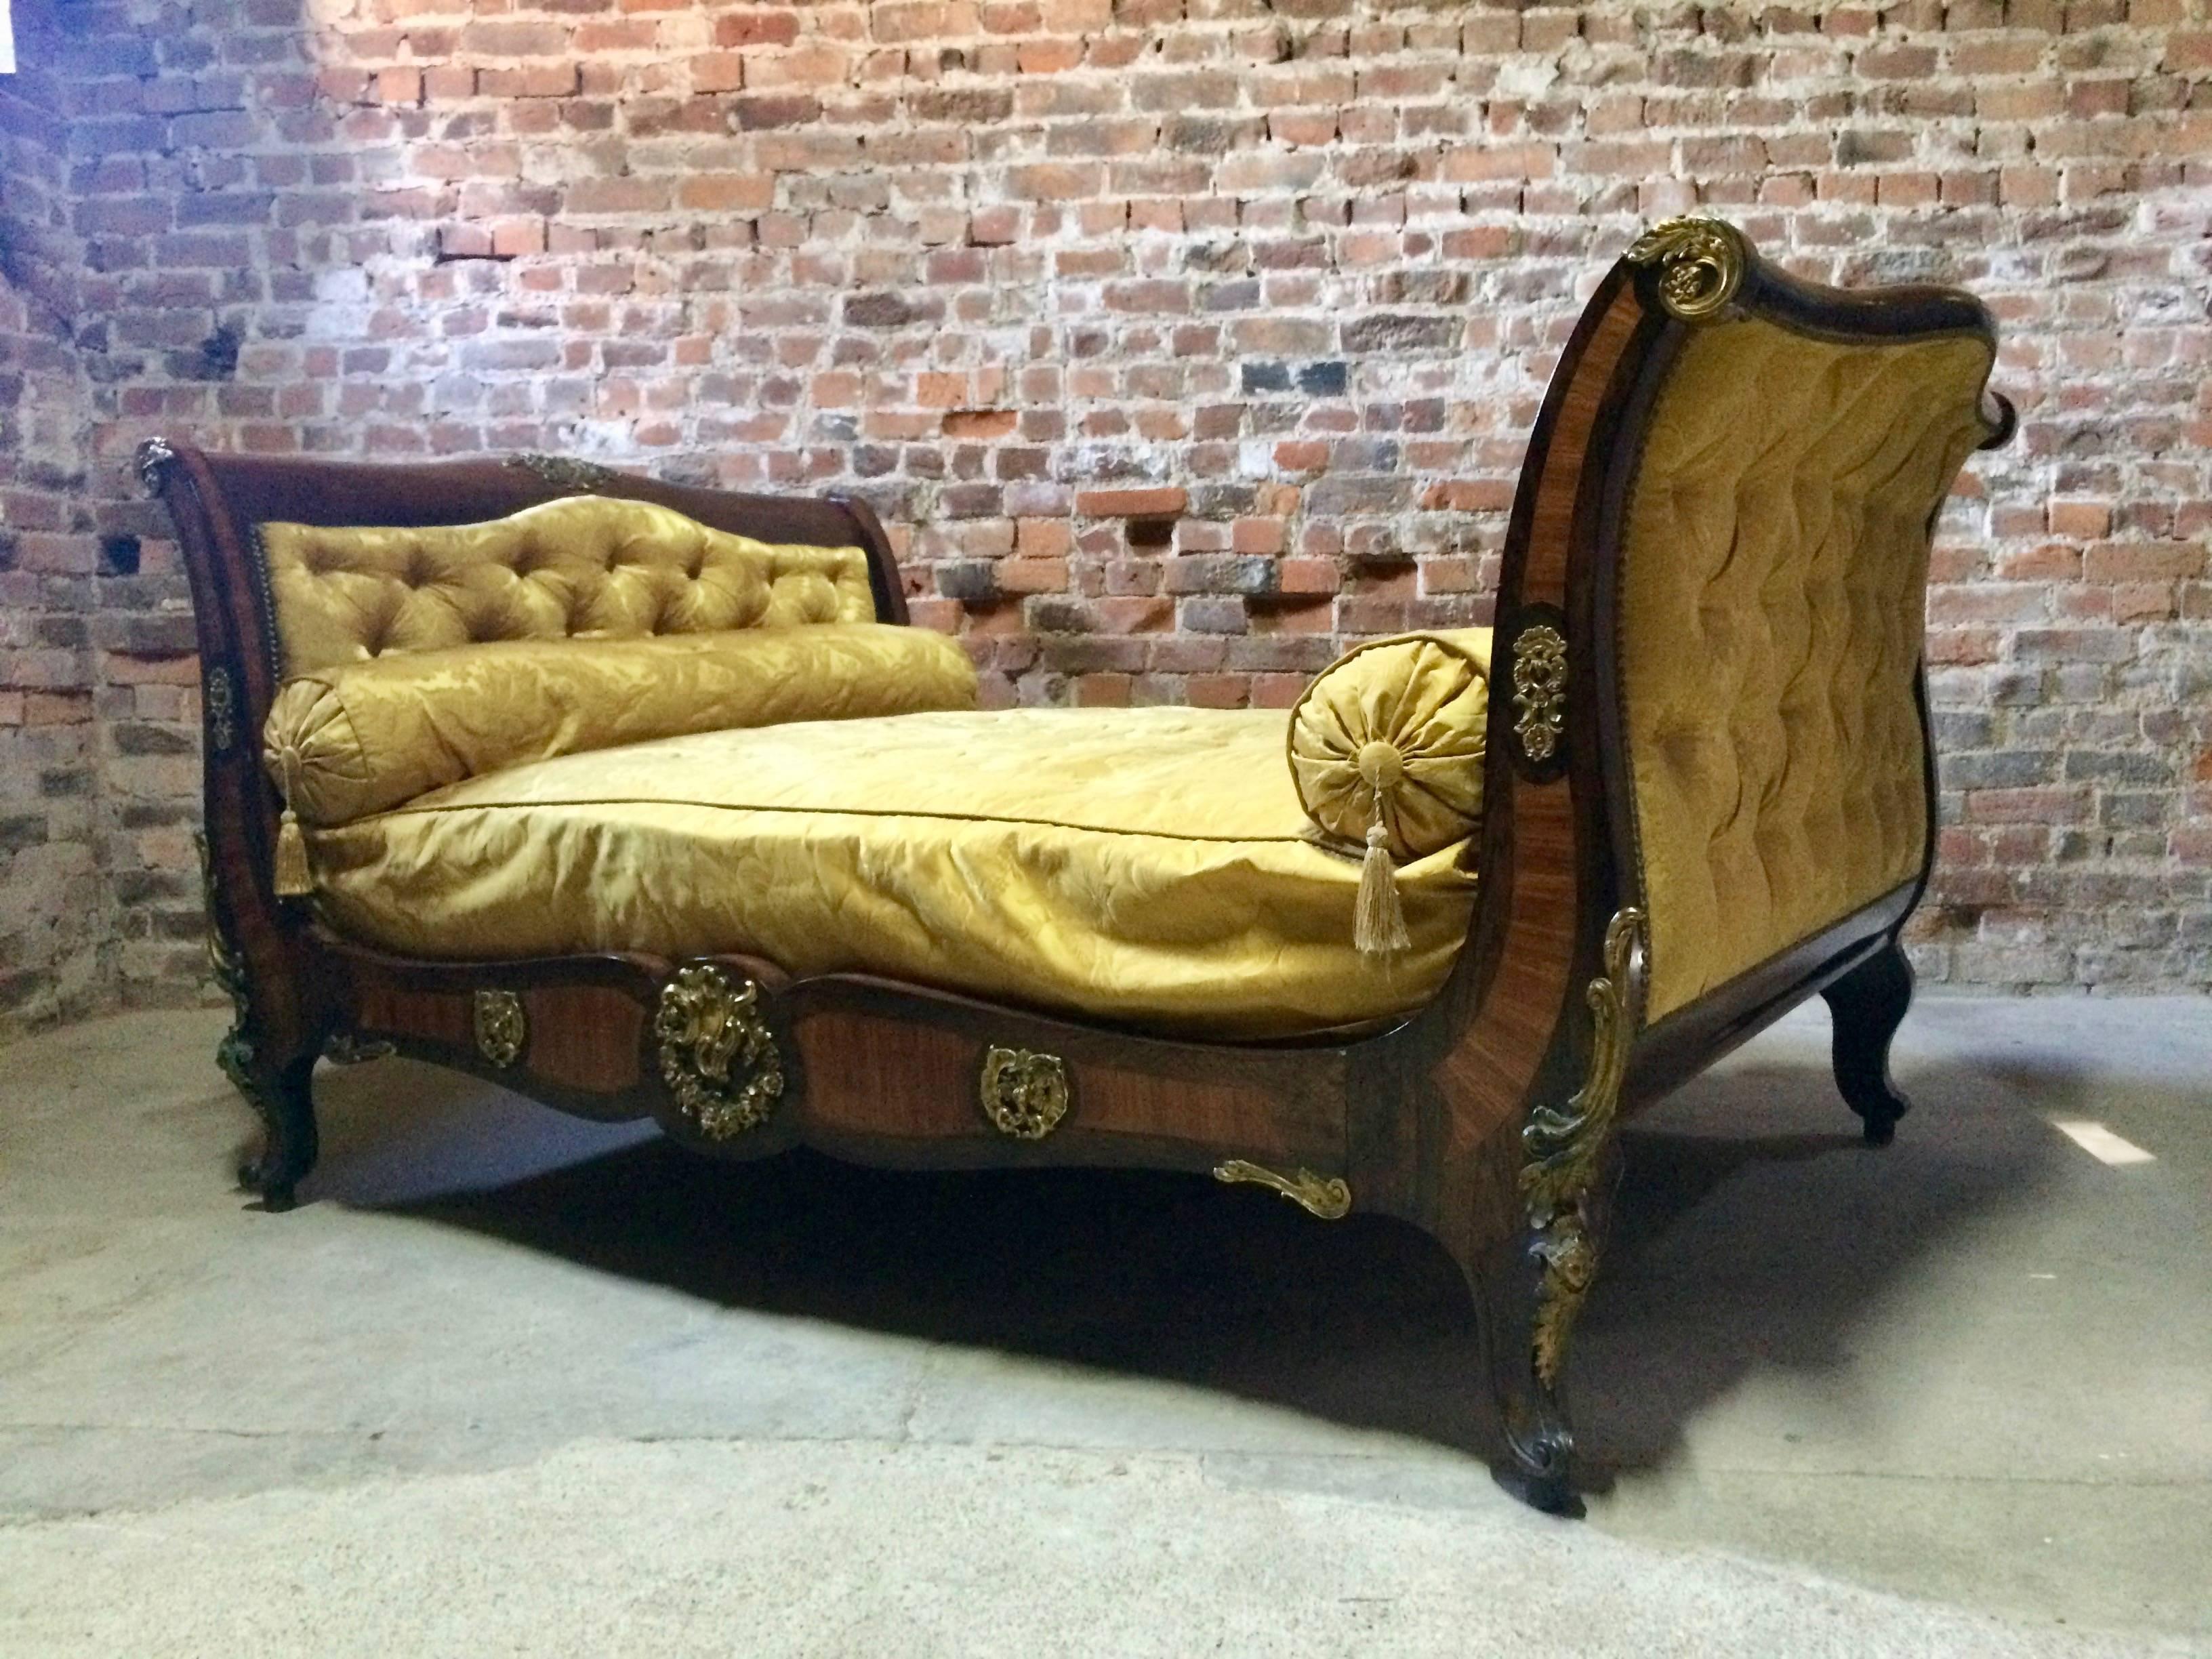 Satinwood Antique Daybed Bed Lit en Bateau French Louis XV Style 19th Century, circa 1815